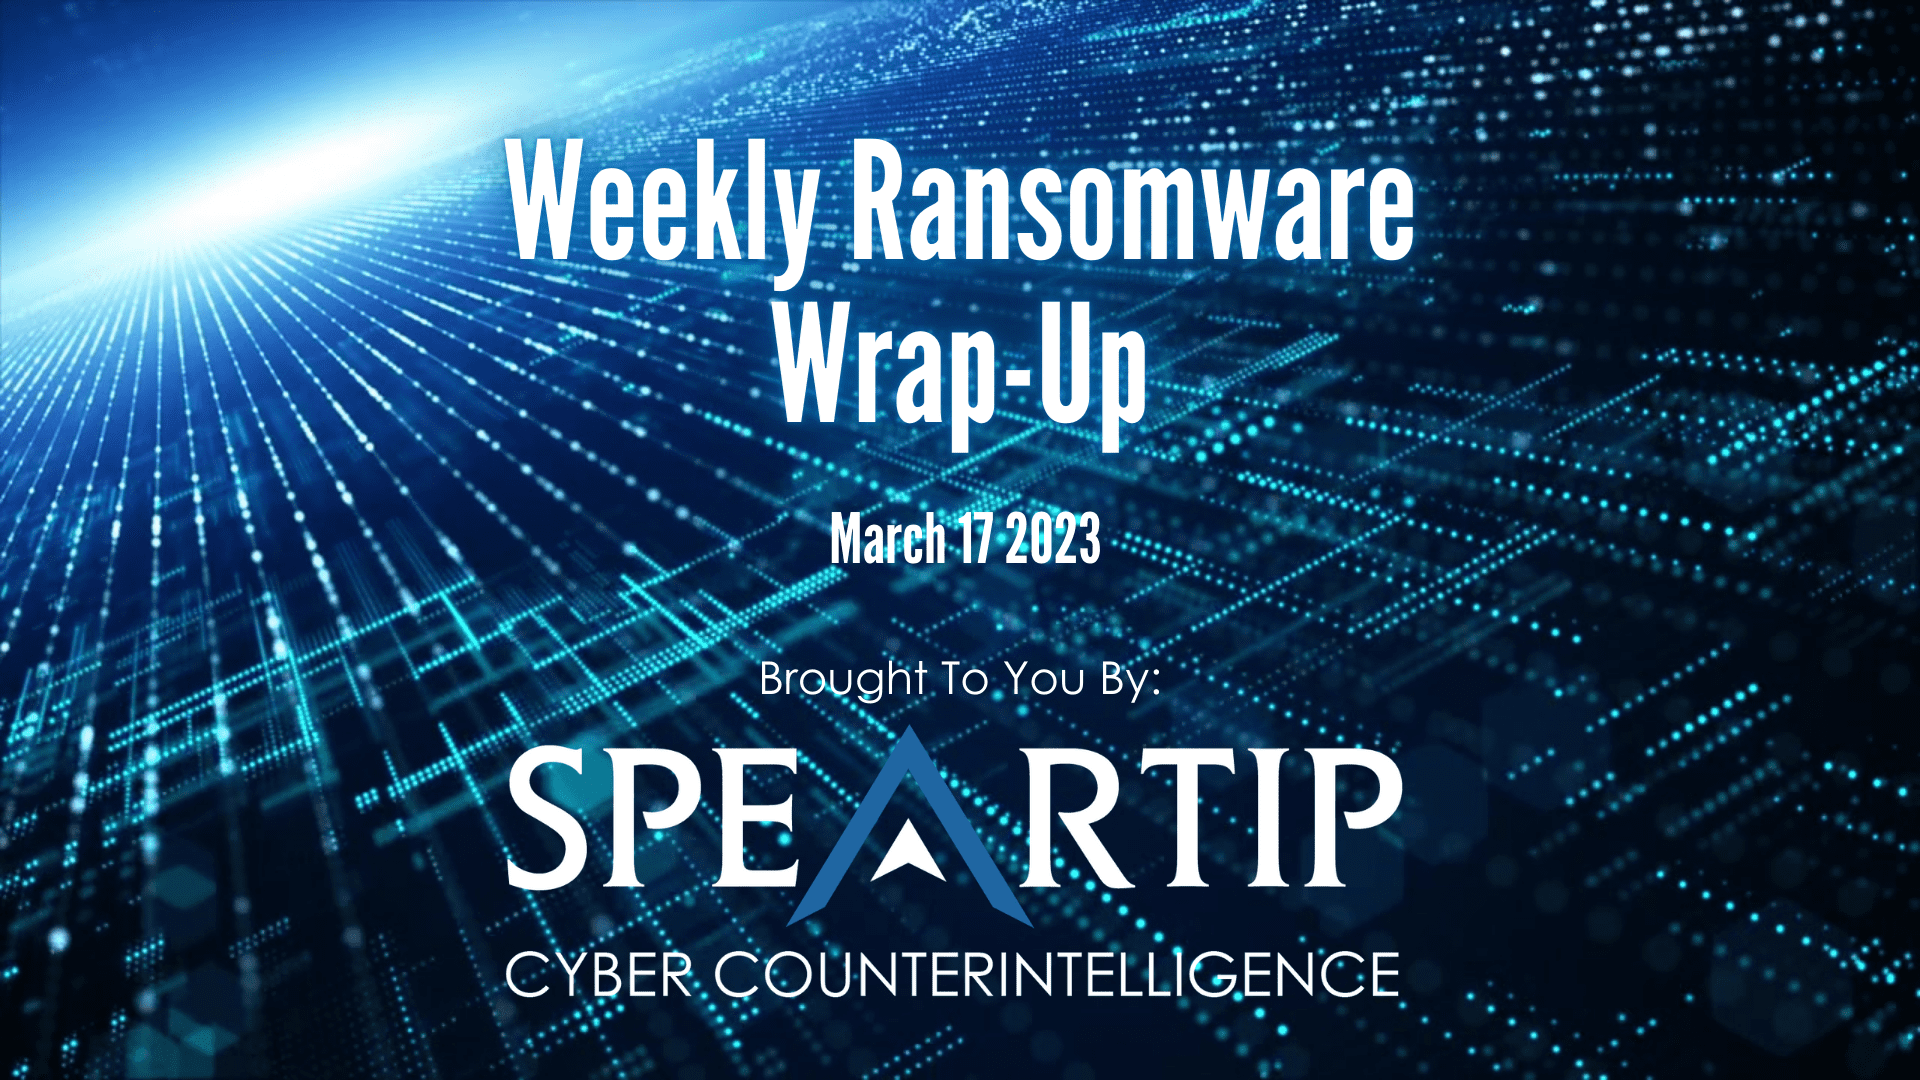 March 17, 2023 Ransomware Wrap-Up